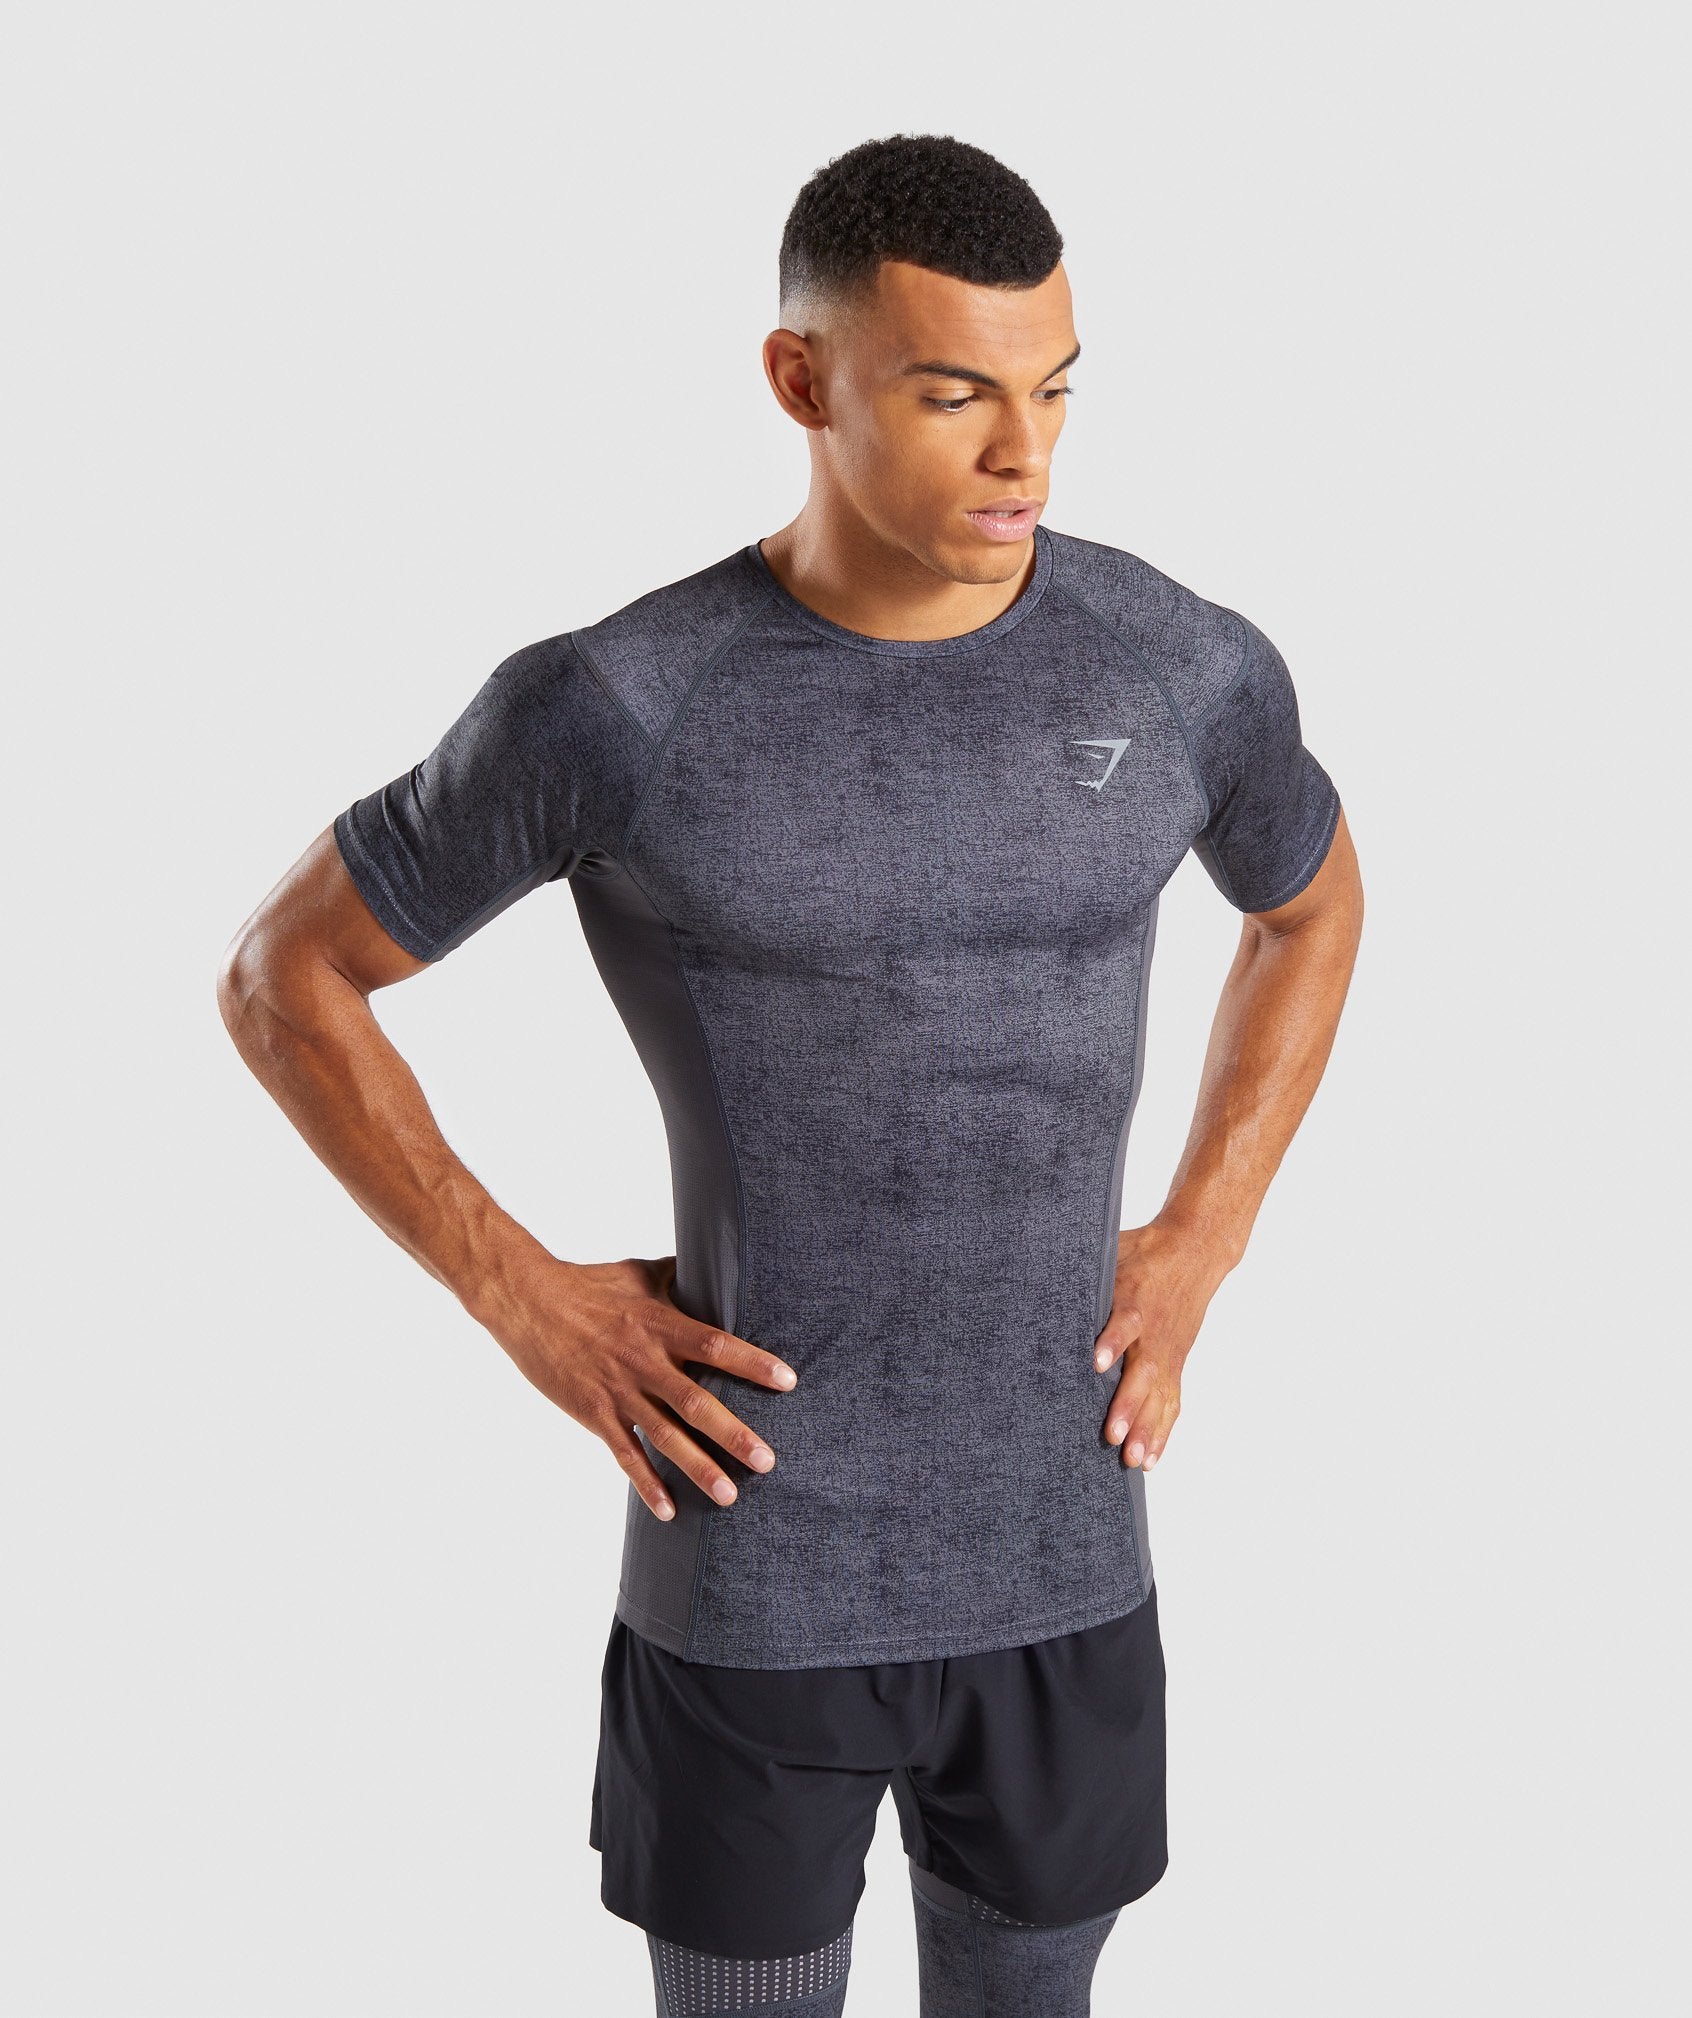 Hybrid Baselayer Top in Charcoal Marl - view 2